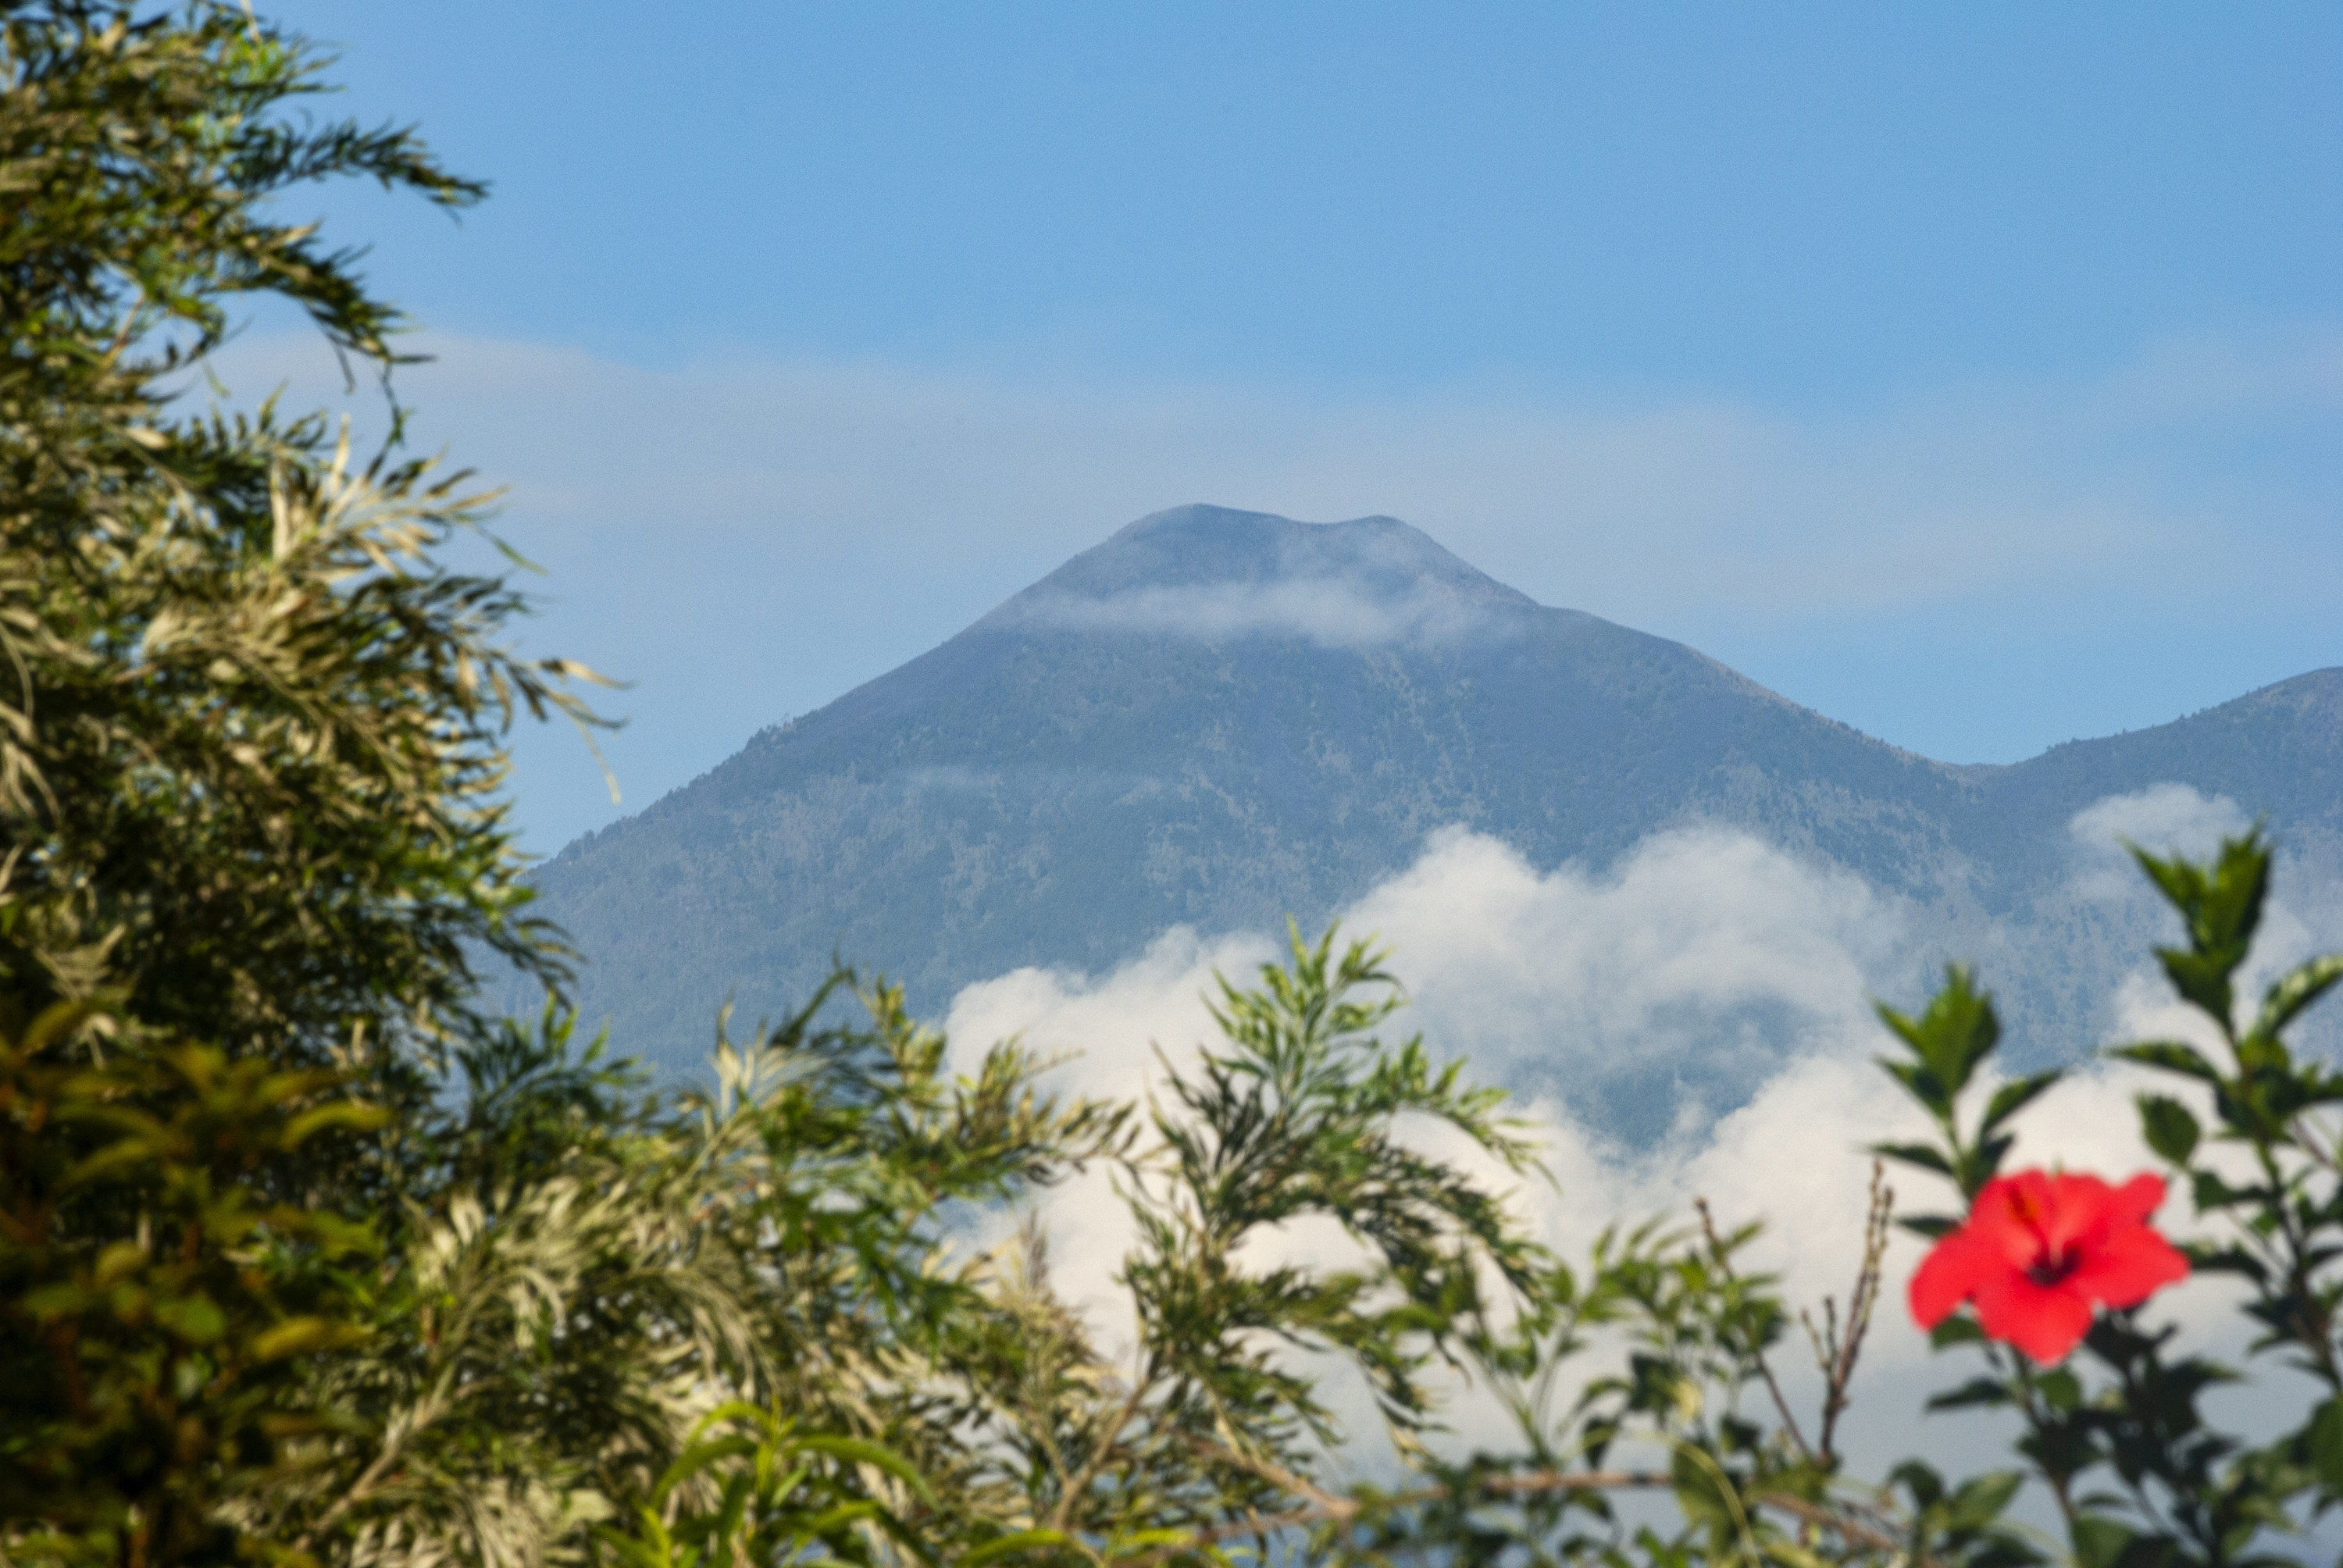 The Acatenango volcano, part of the volcanic chain in the Republic of Guatemala. A hibiscus flower in the foreground with foliage.